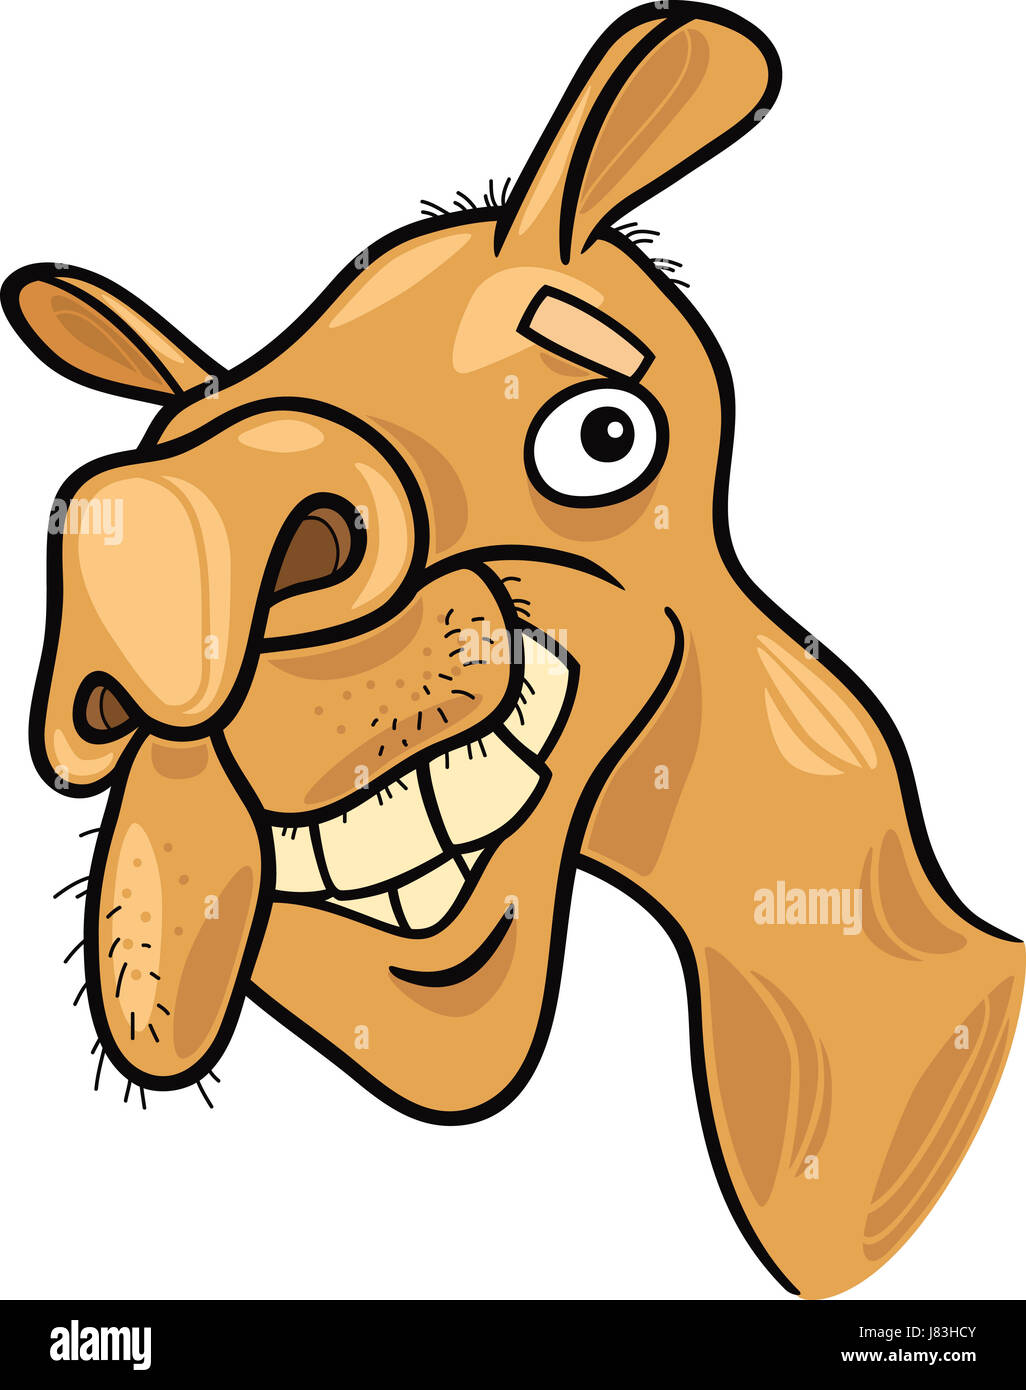 animal asia africa camel illustration funny cartoon laugh laughs laughing twit Stock Photo